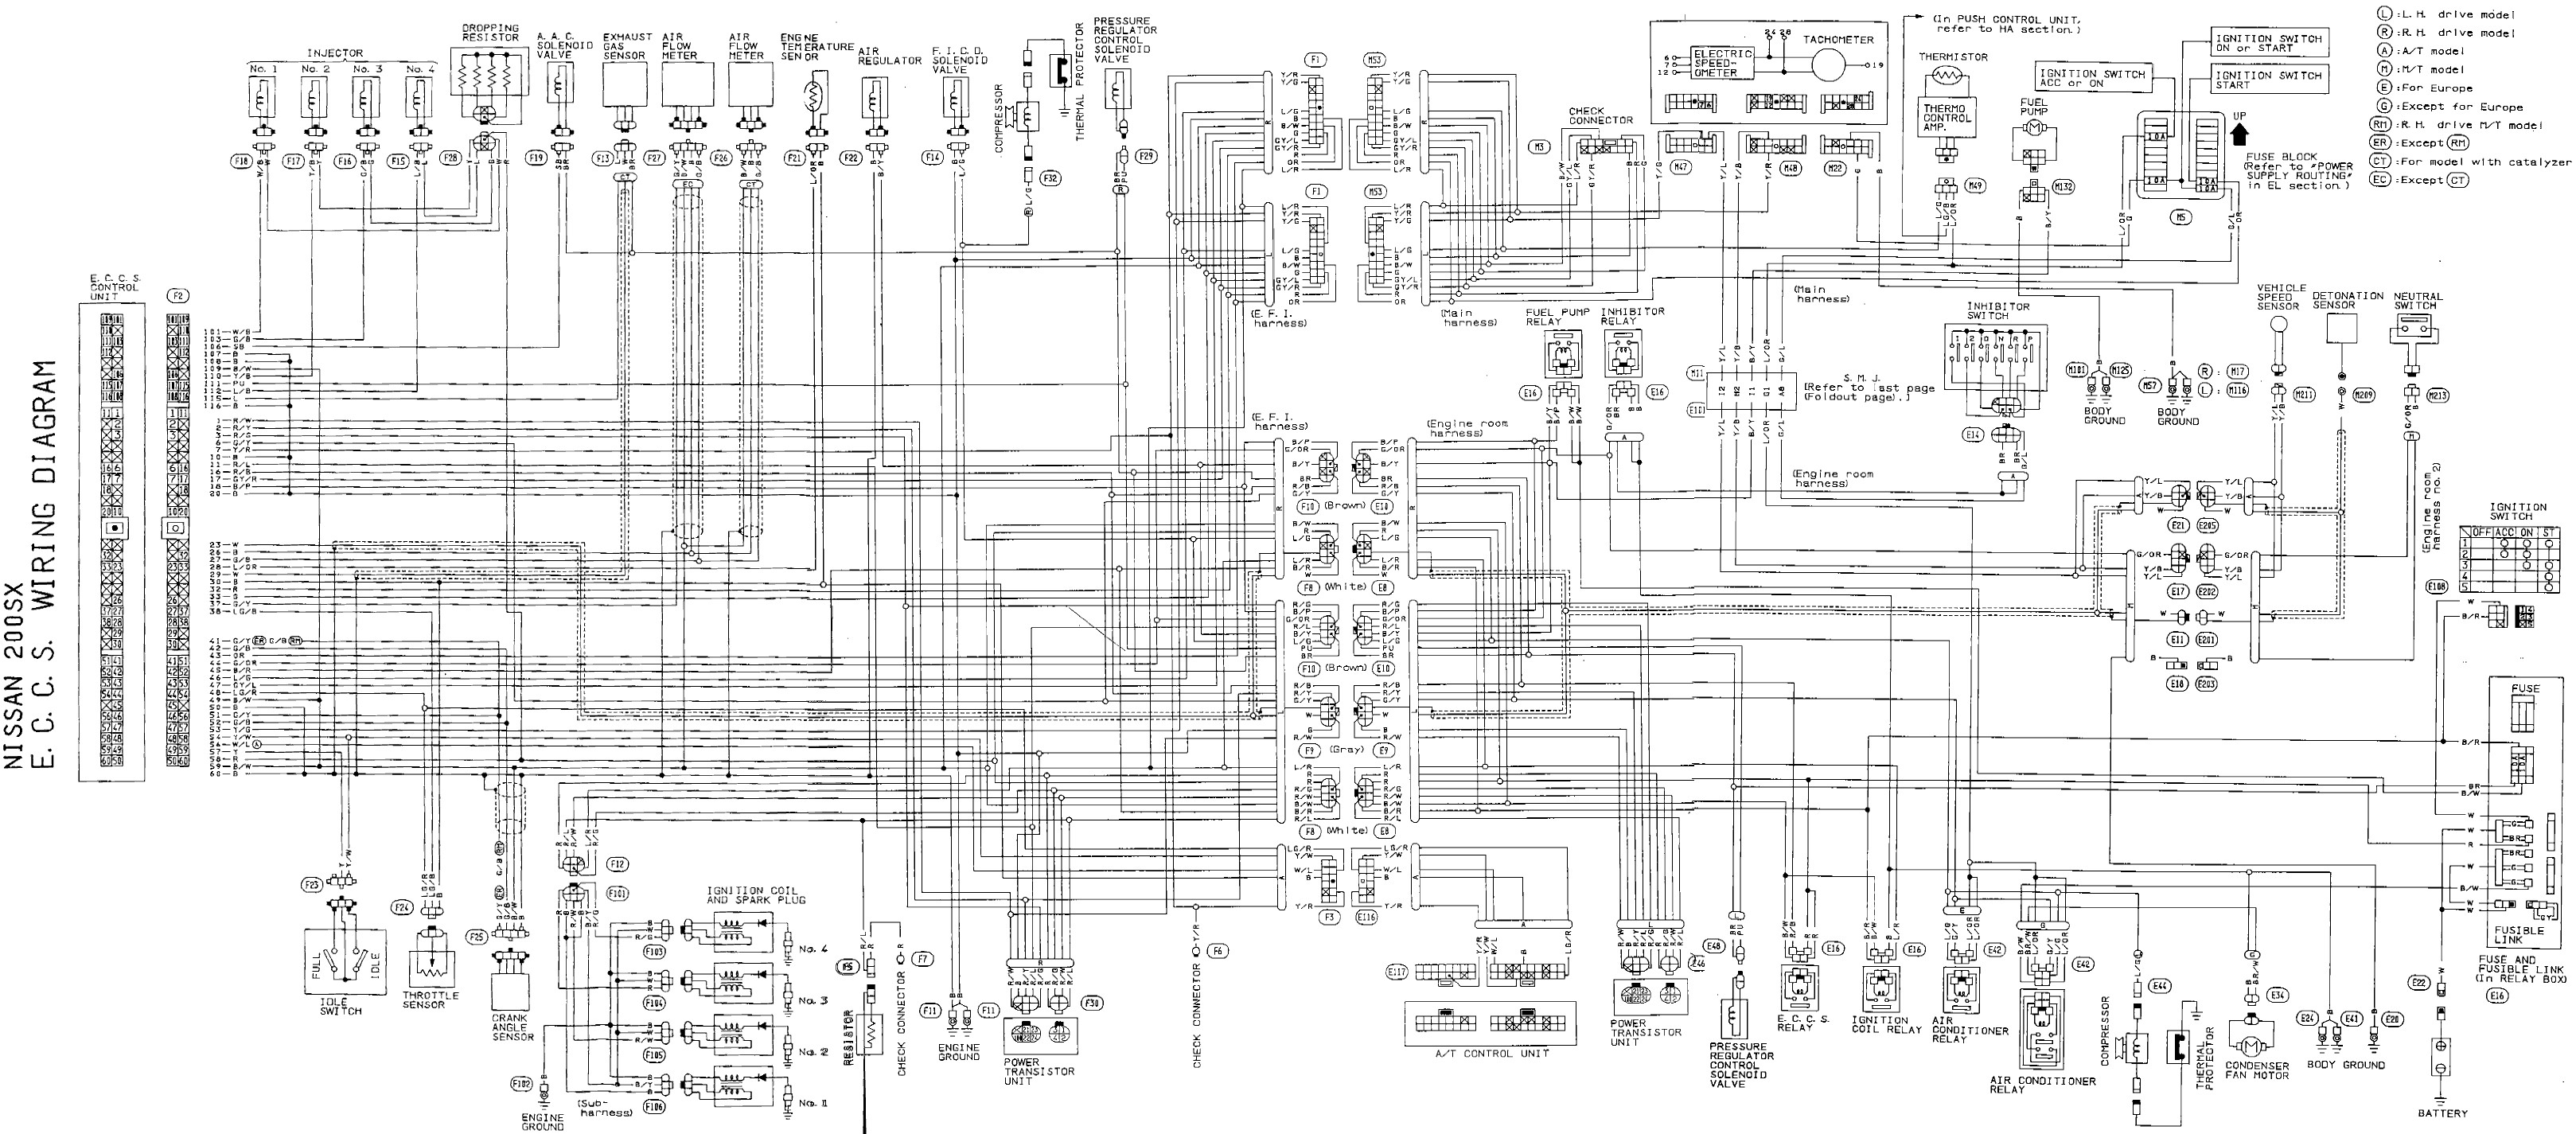 Toyota Engine Diagram 200sx Engine Wiring Harness Get Free Image About Wiring Diagram Of Toyota Engine Diagram